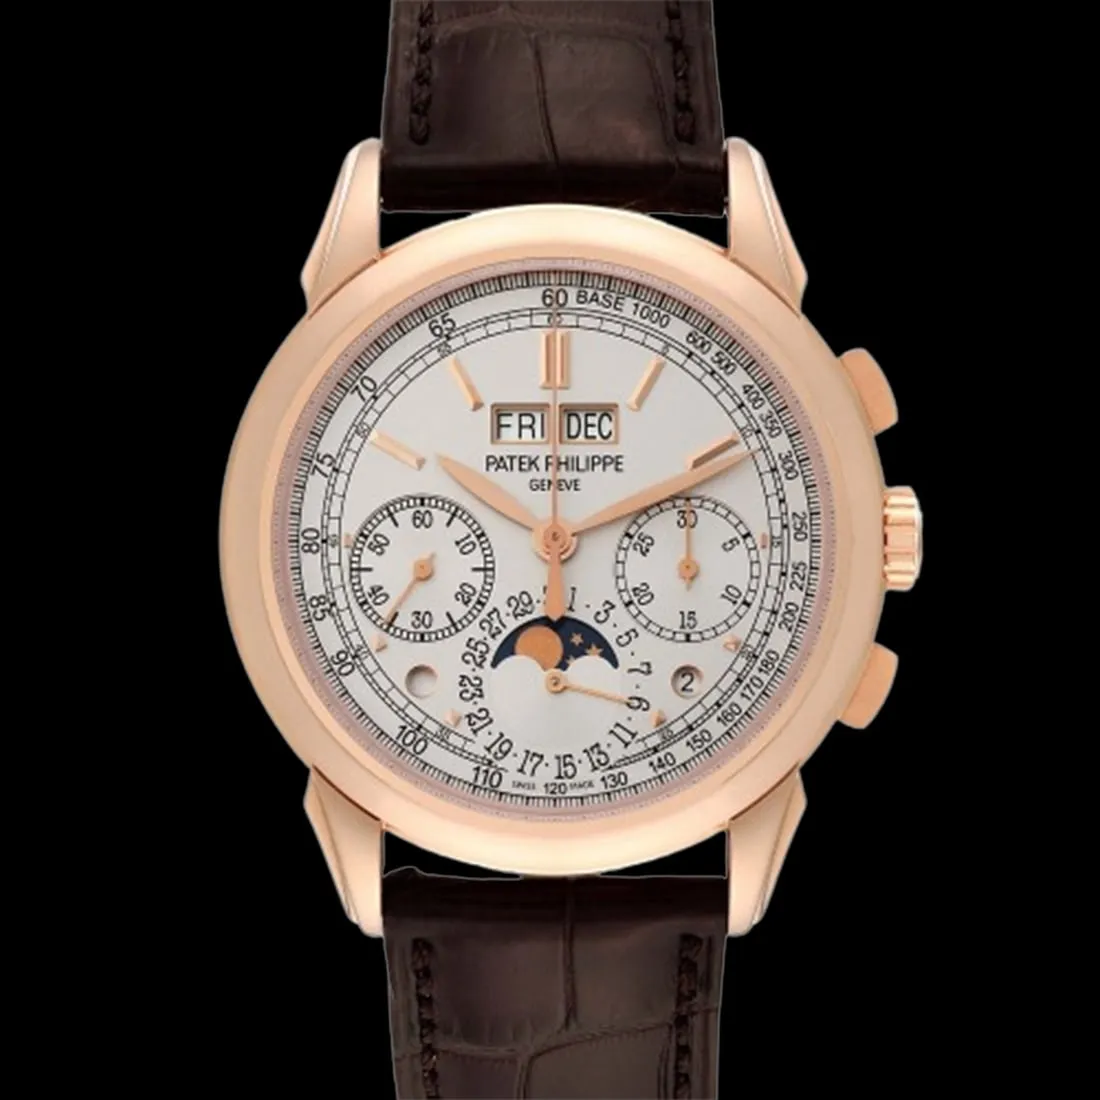 Lot #26, a Patek Philippe Perpetual Calendar watch, is estimated at $250,000 - $275,000. Image courtesy of NY Elizabeth.